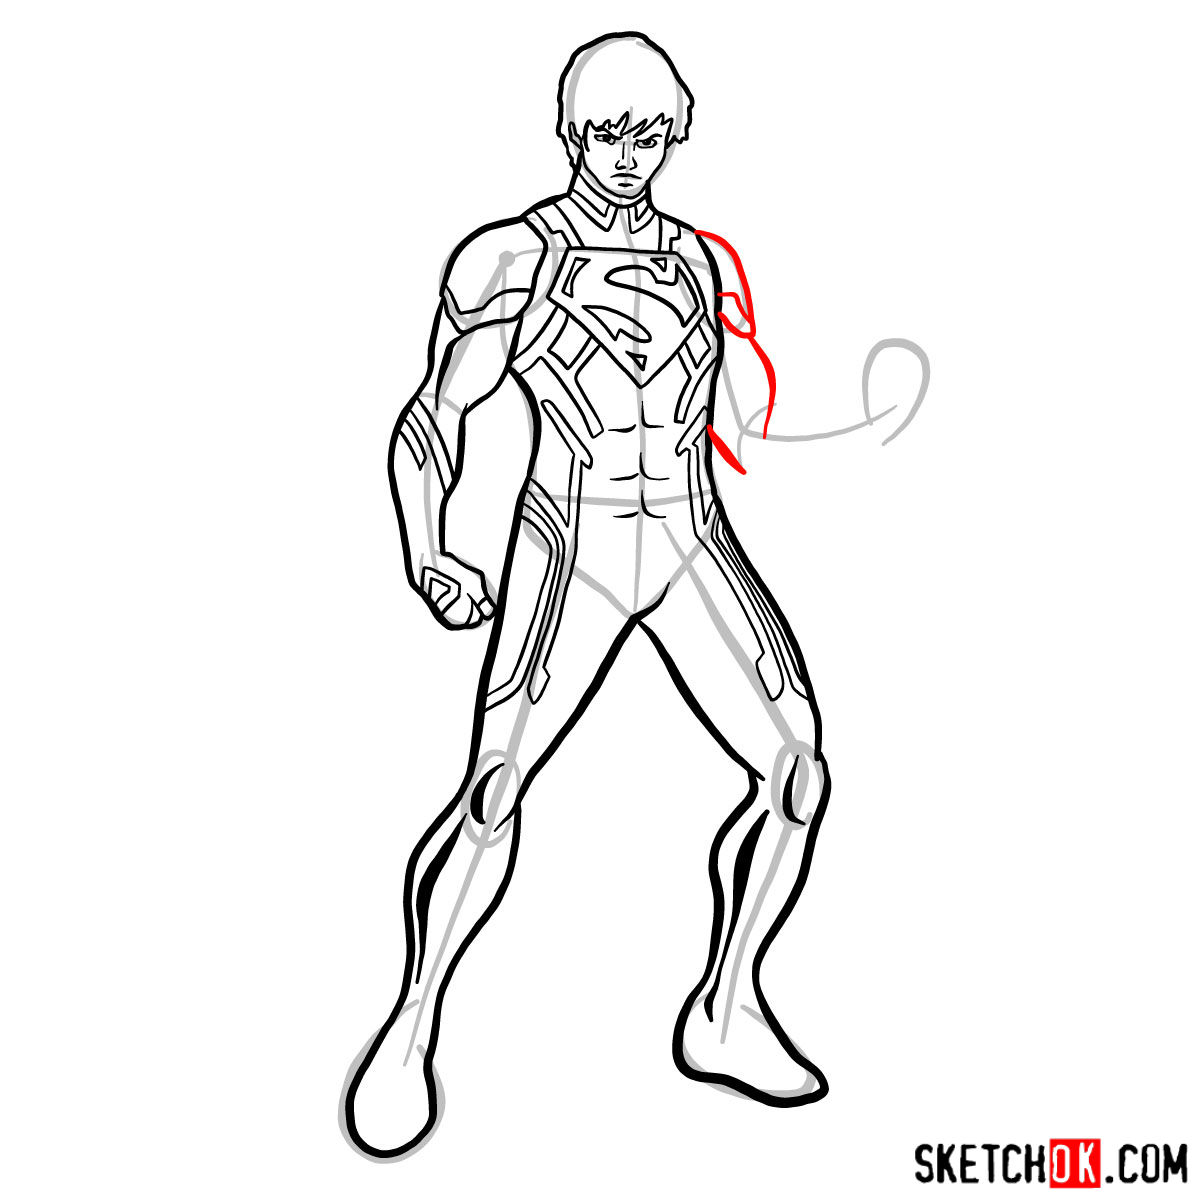 How to draw Superboy in a black suit - step 13